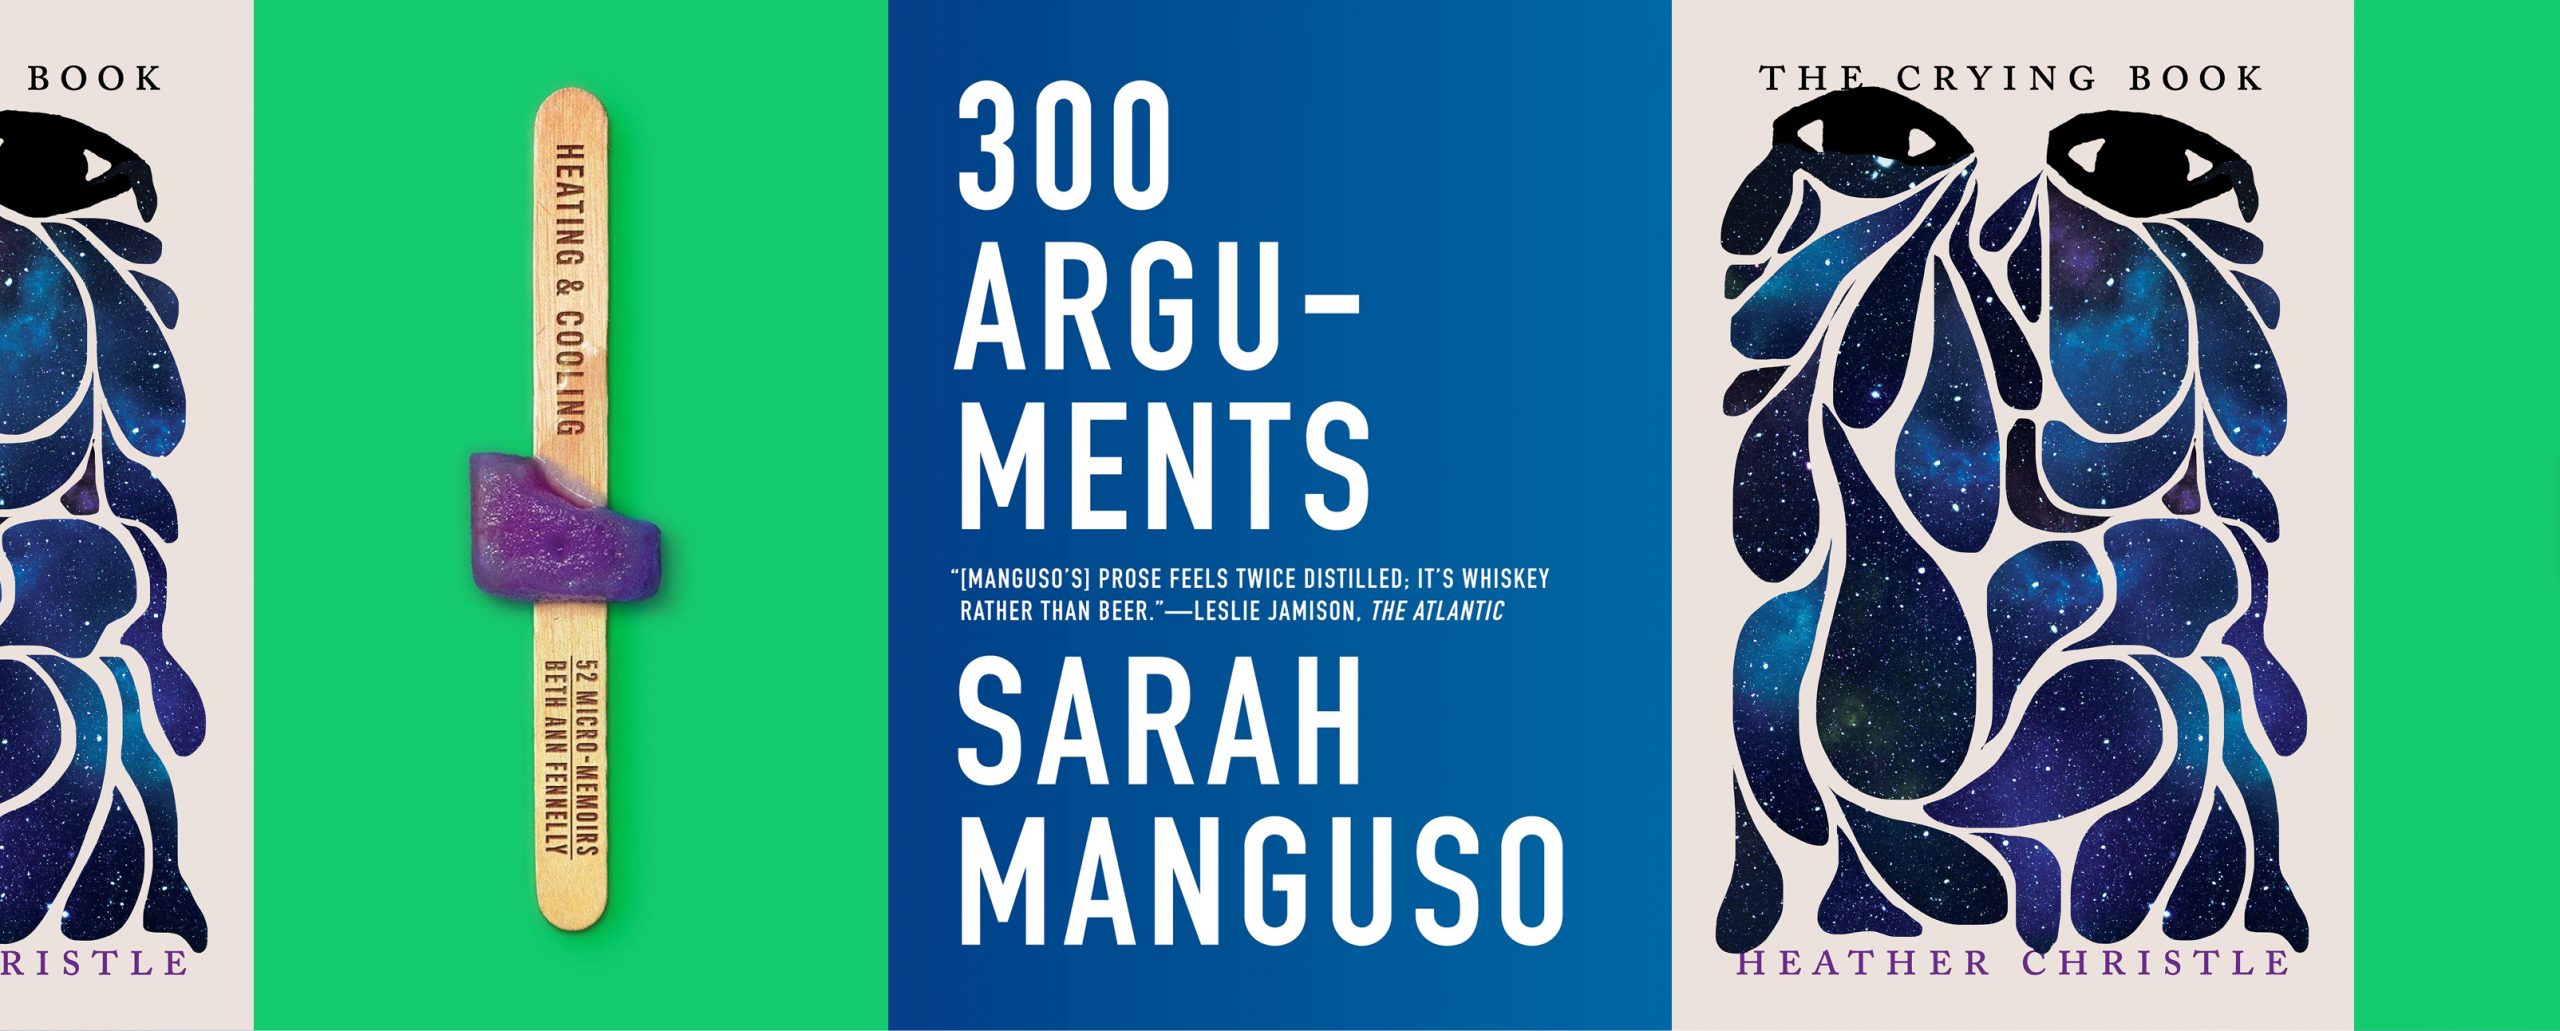 the book covers for 300 Arguments, Heating & Cooling, and The Crying Book